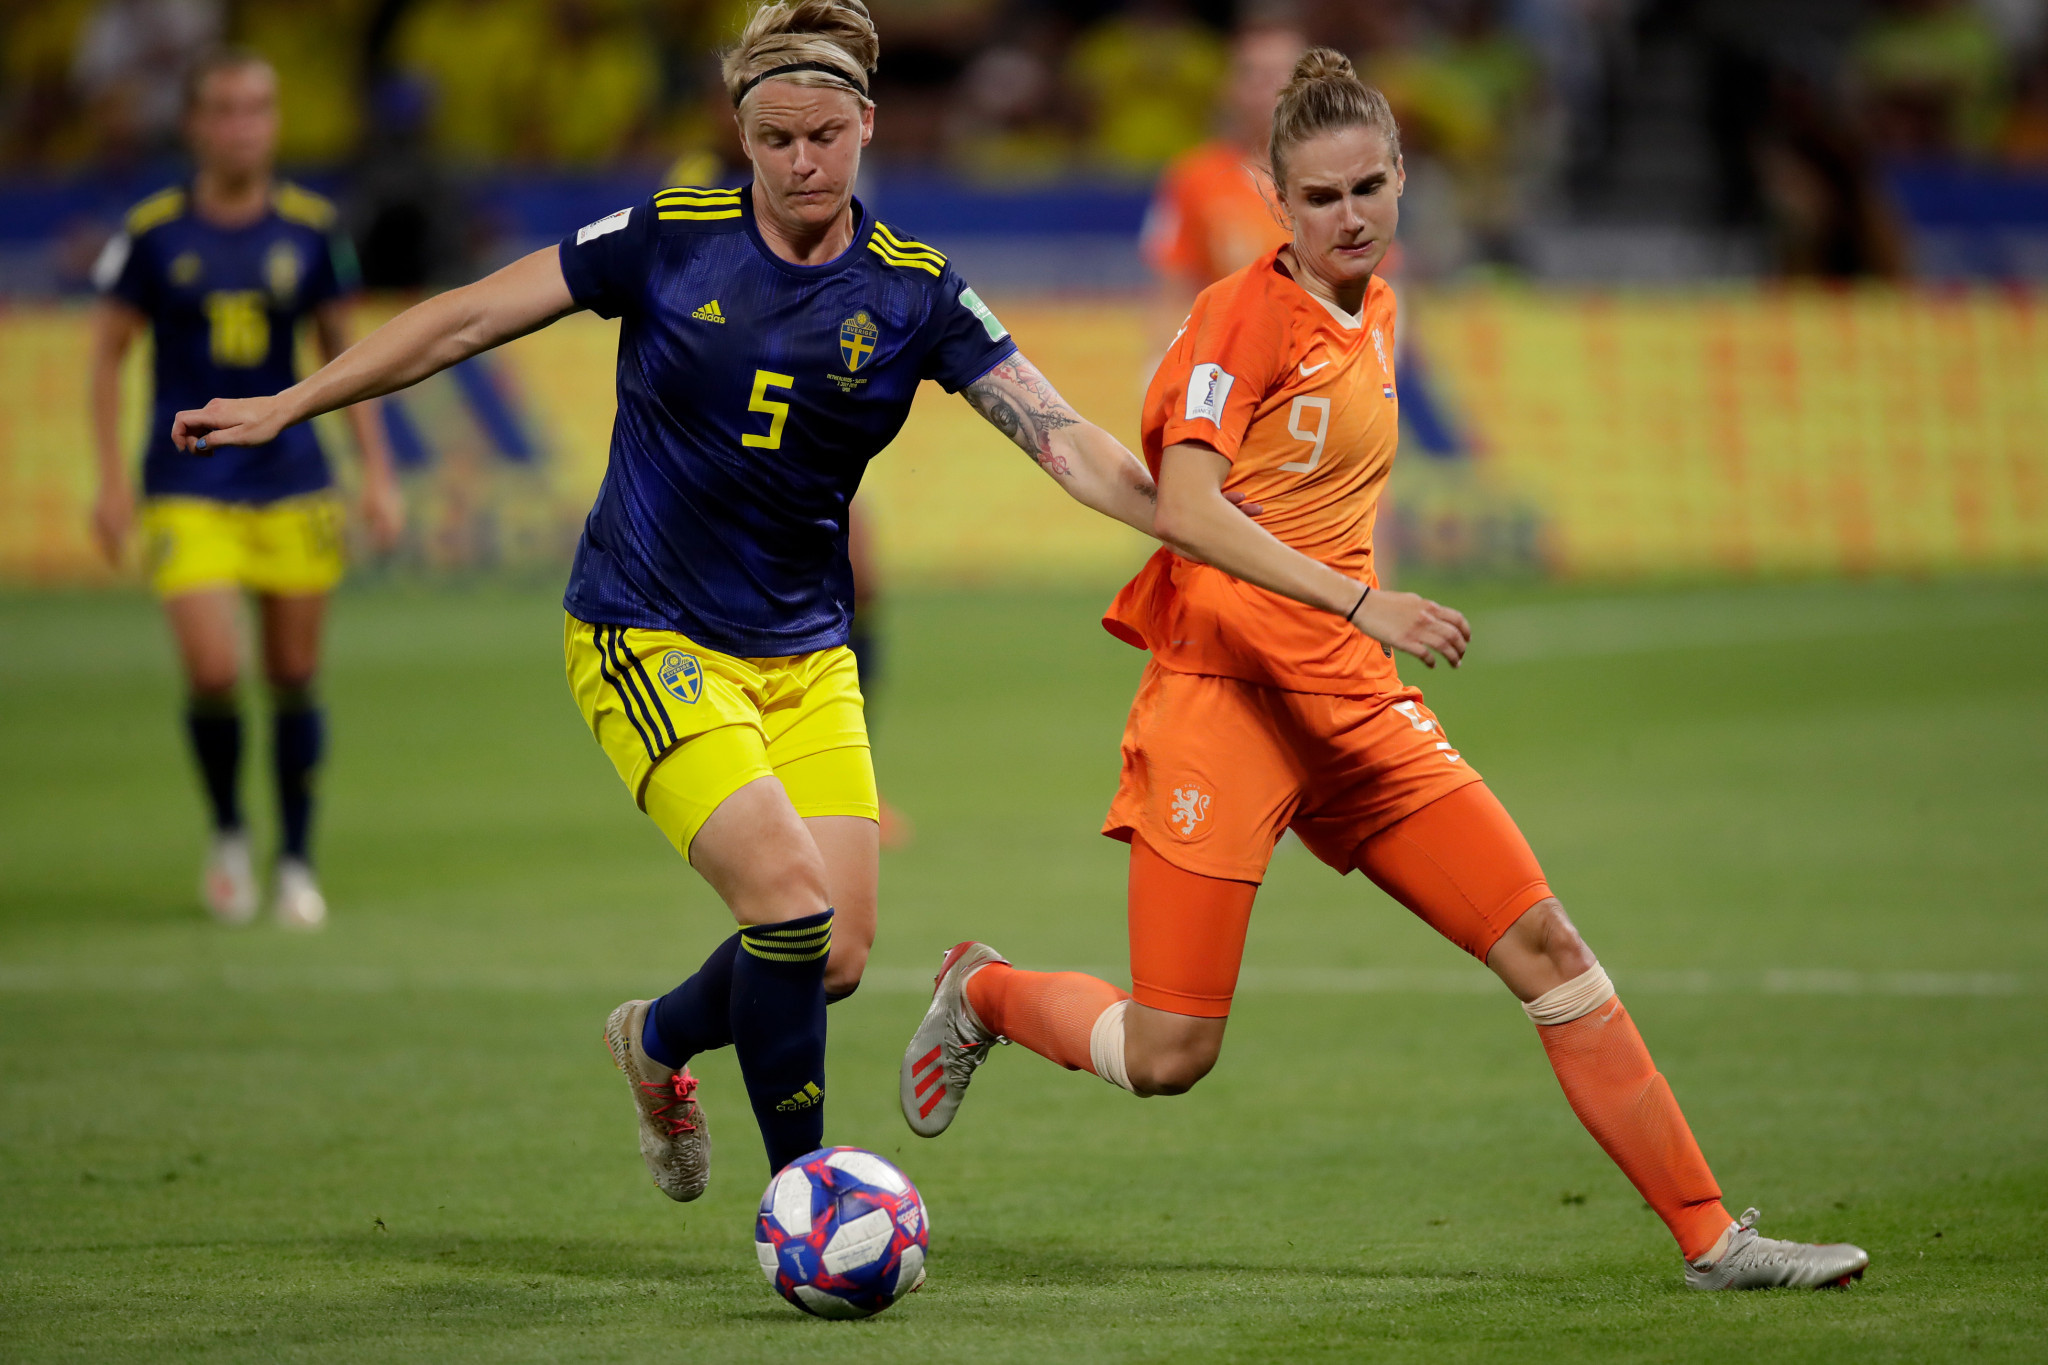 The Netherlands and Sweden are two of the world's top four sides in the FIFA World Rankings, and they will meet in their Group C opener at Bramall Lane ©Getty Images